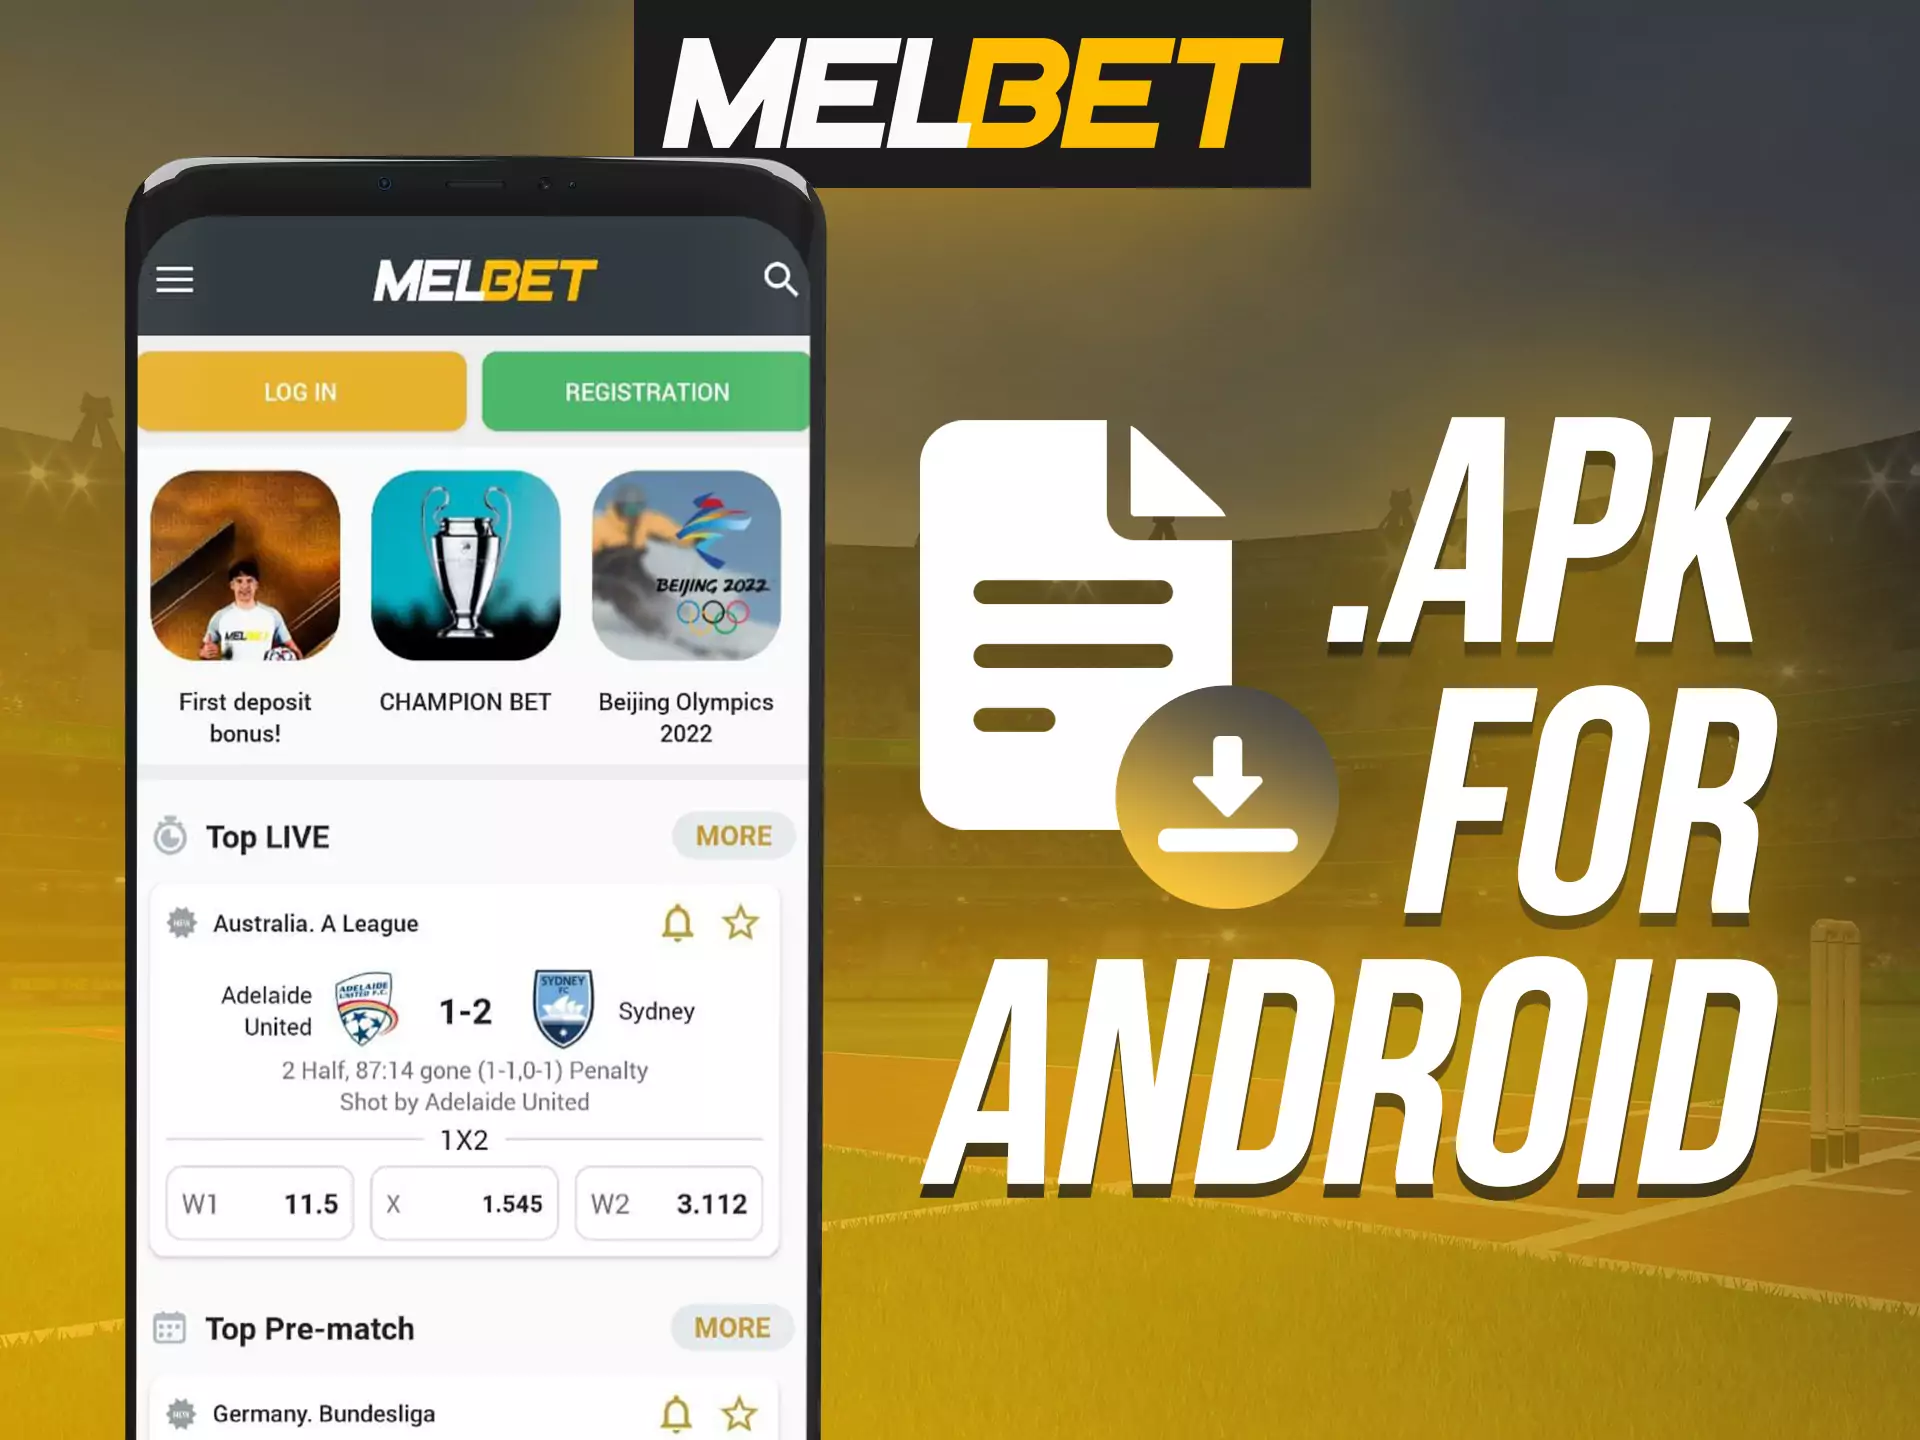 Download Melbet app on your Android device.